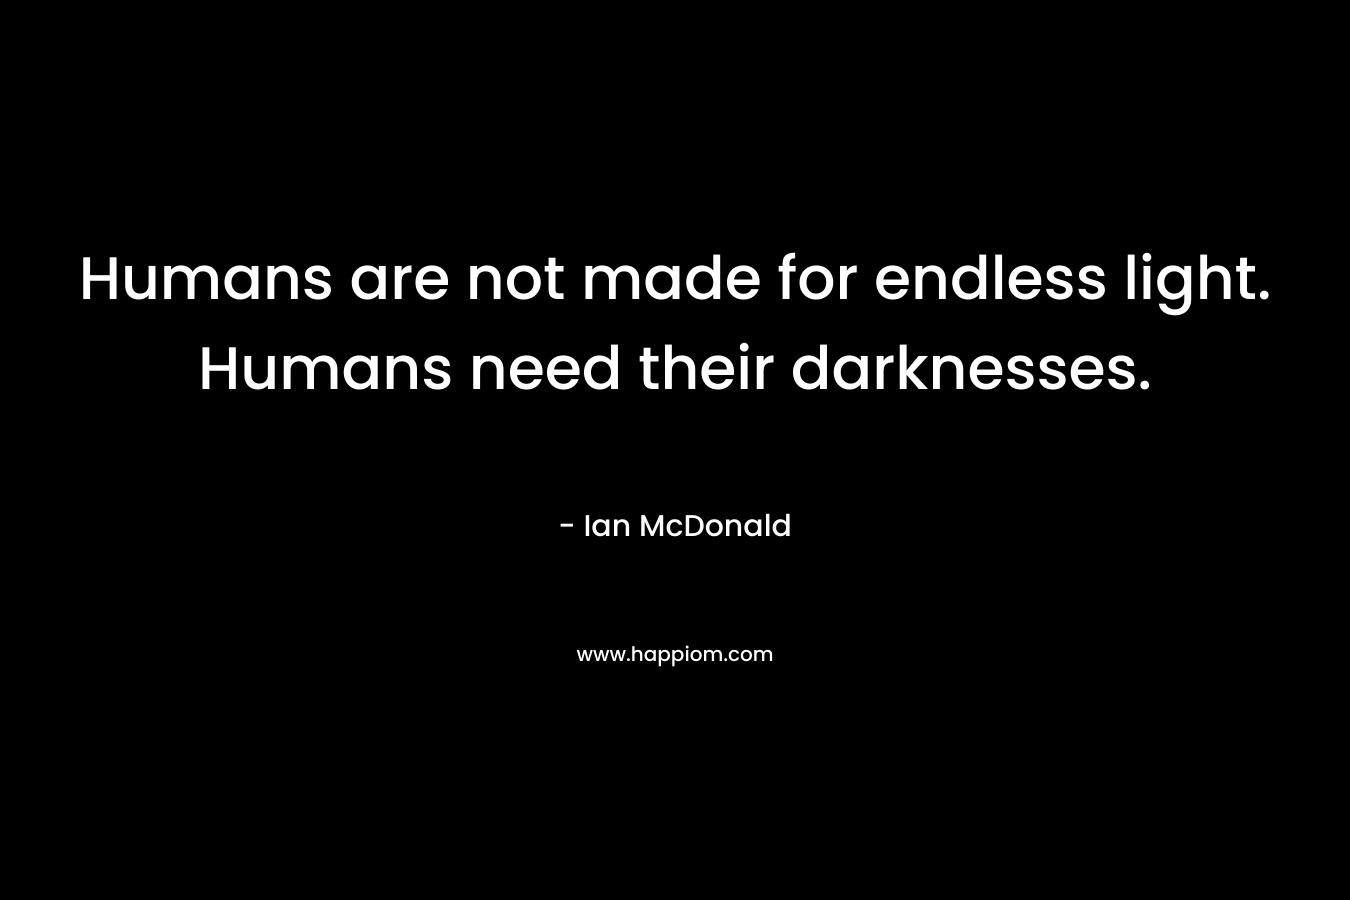 Humans are not made for endless light. Humans need their darknesses.